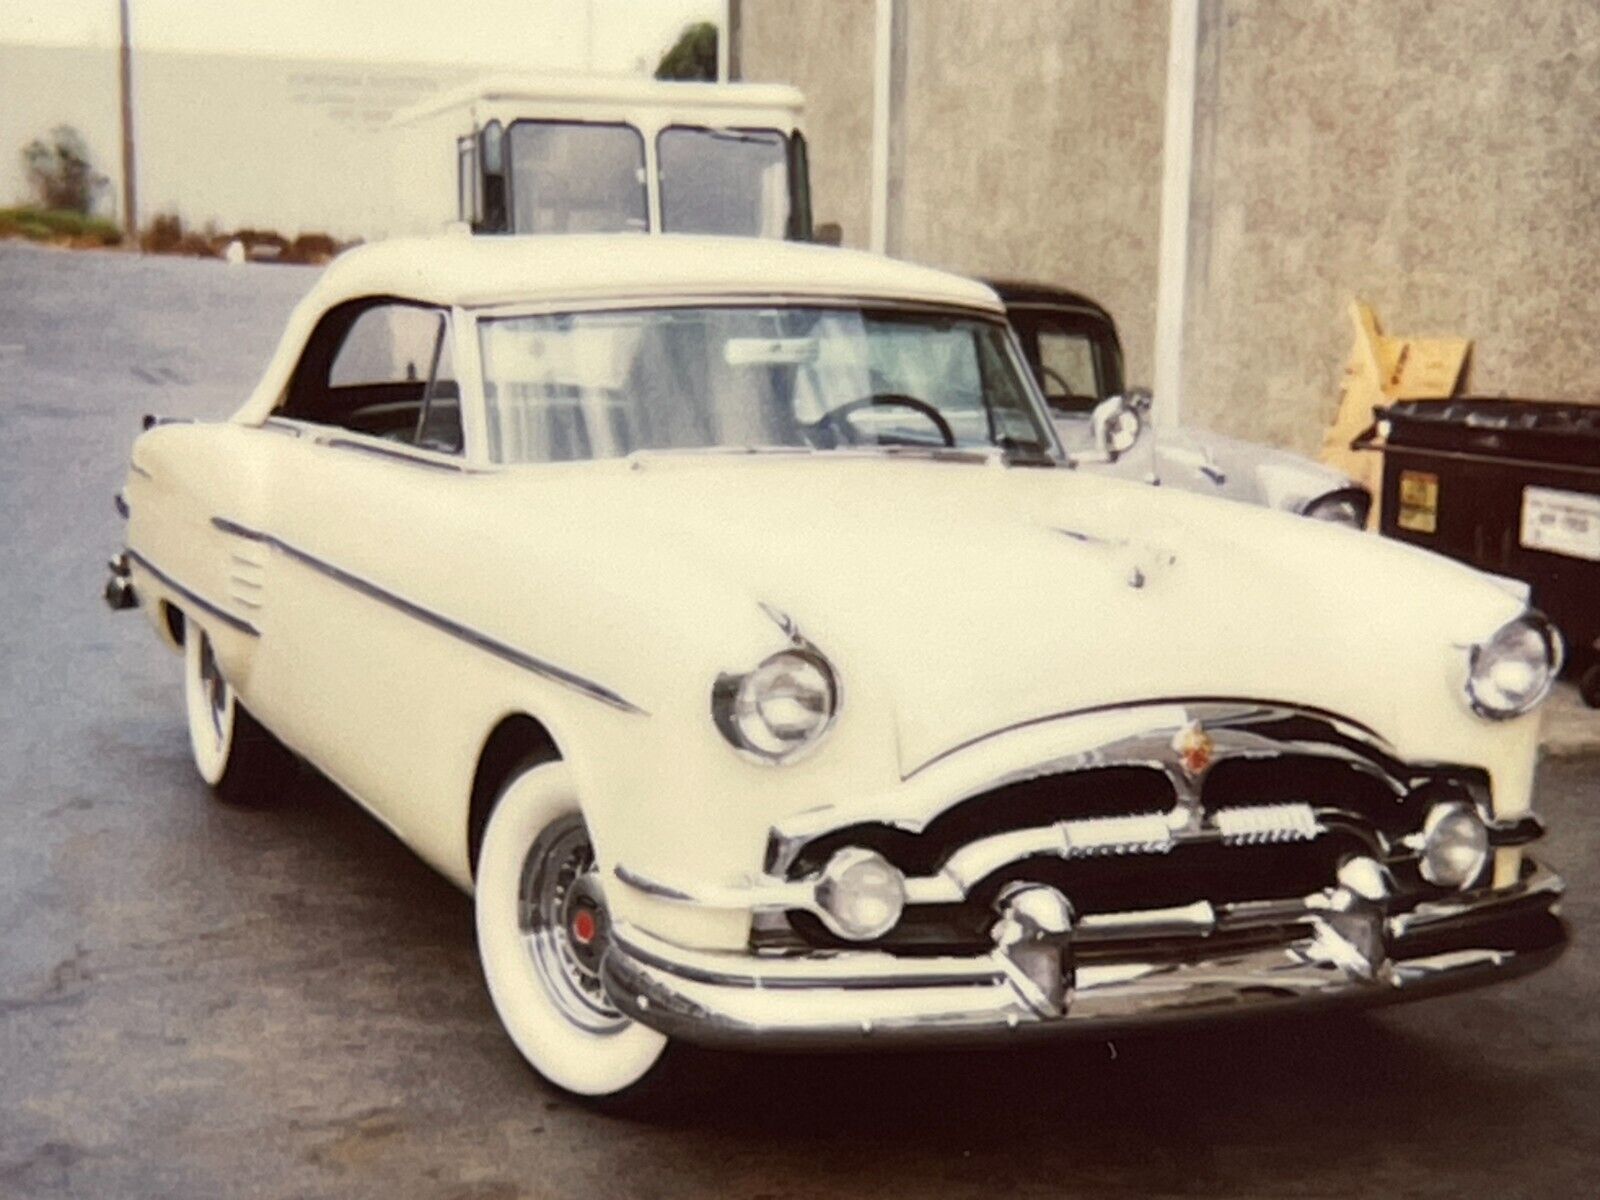 CCF 2 Photographs From 1980-90's Polaroid Artistic Of A 1954 Packard Convertible